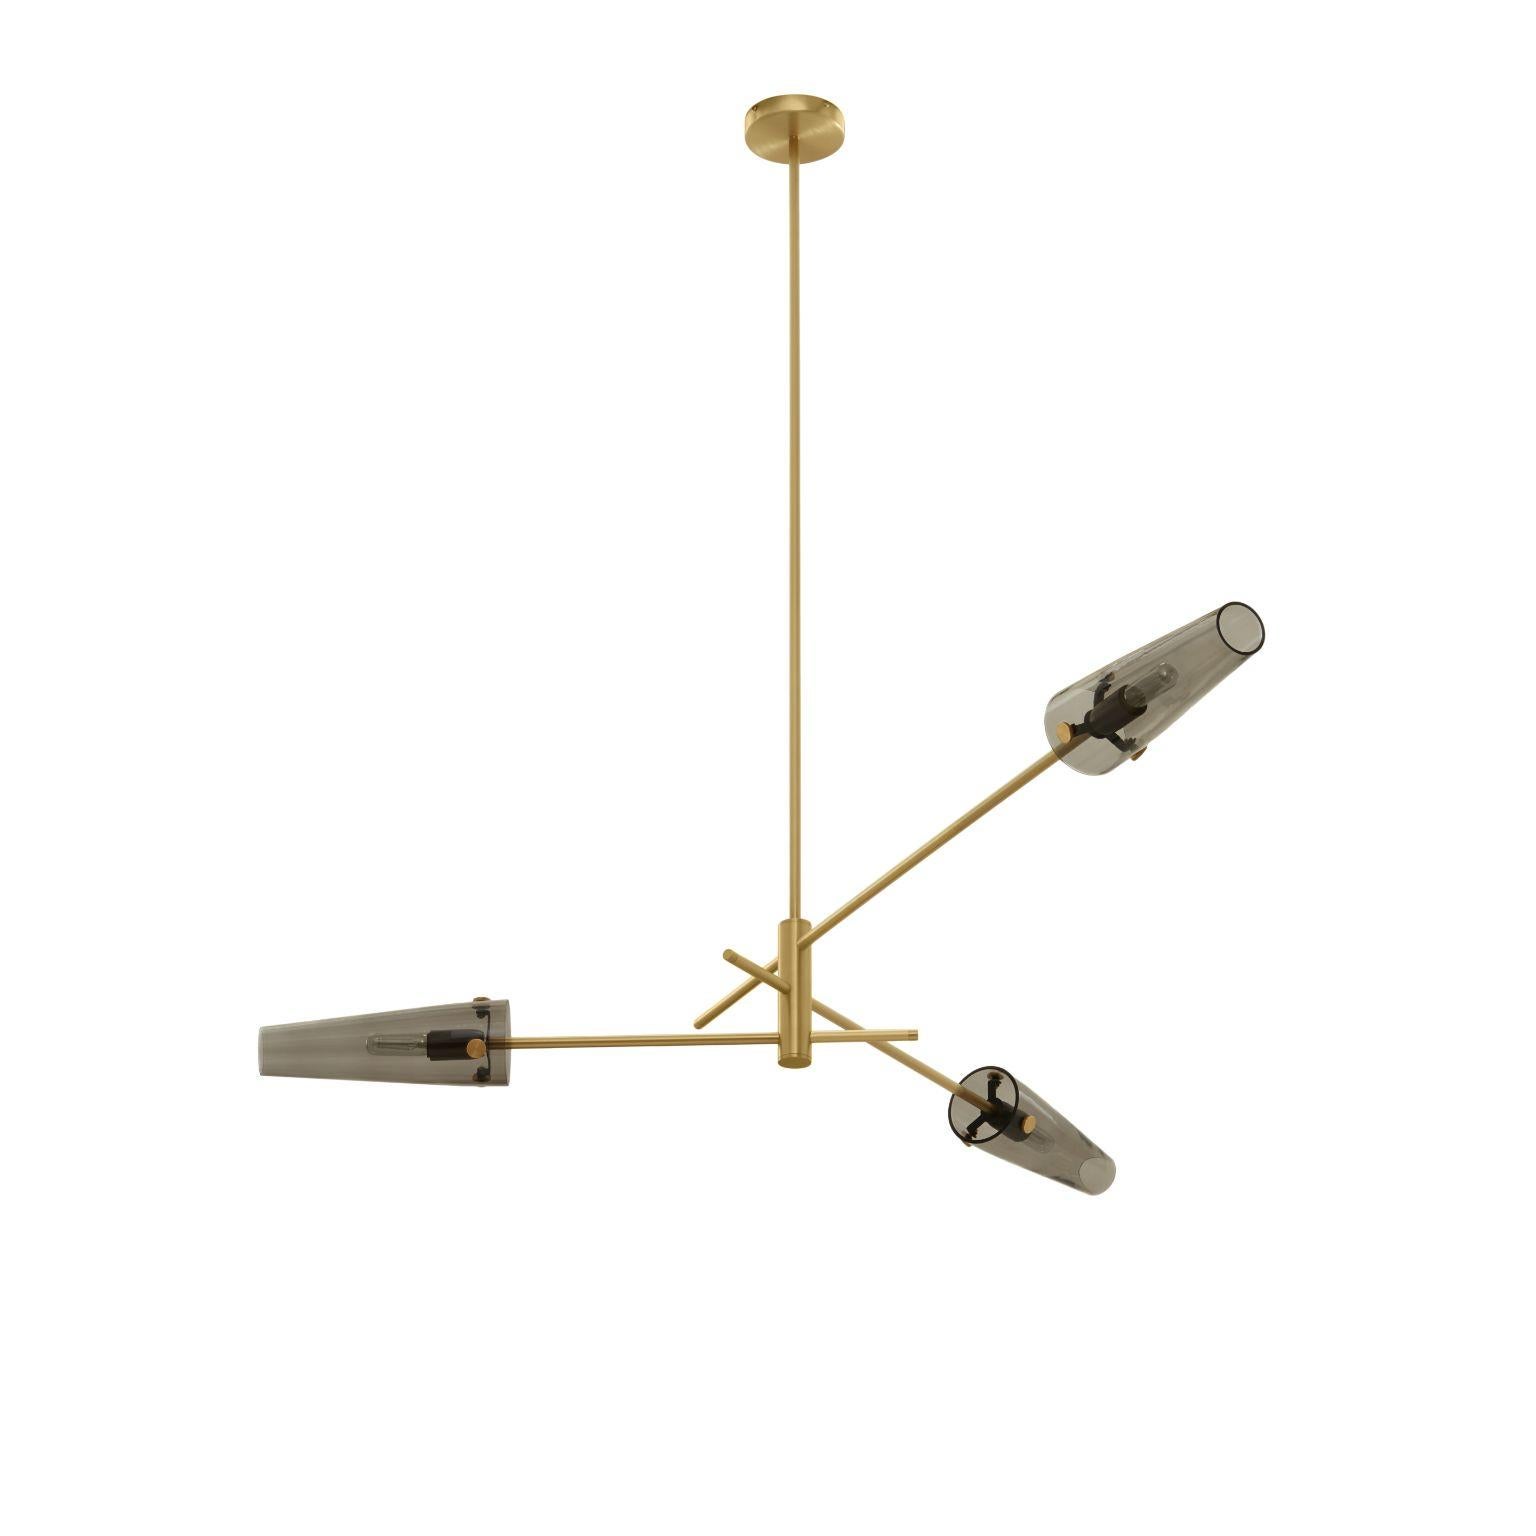 Axis three pendant lamp by CTO Lighting
Materials: Satin brass or dark Bronze with smoked glass shades
Dimensions: 121 x H min 24 cm 

All our lamps can be wired according to each country. If sold to the USA it will be wired for the USA for